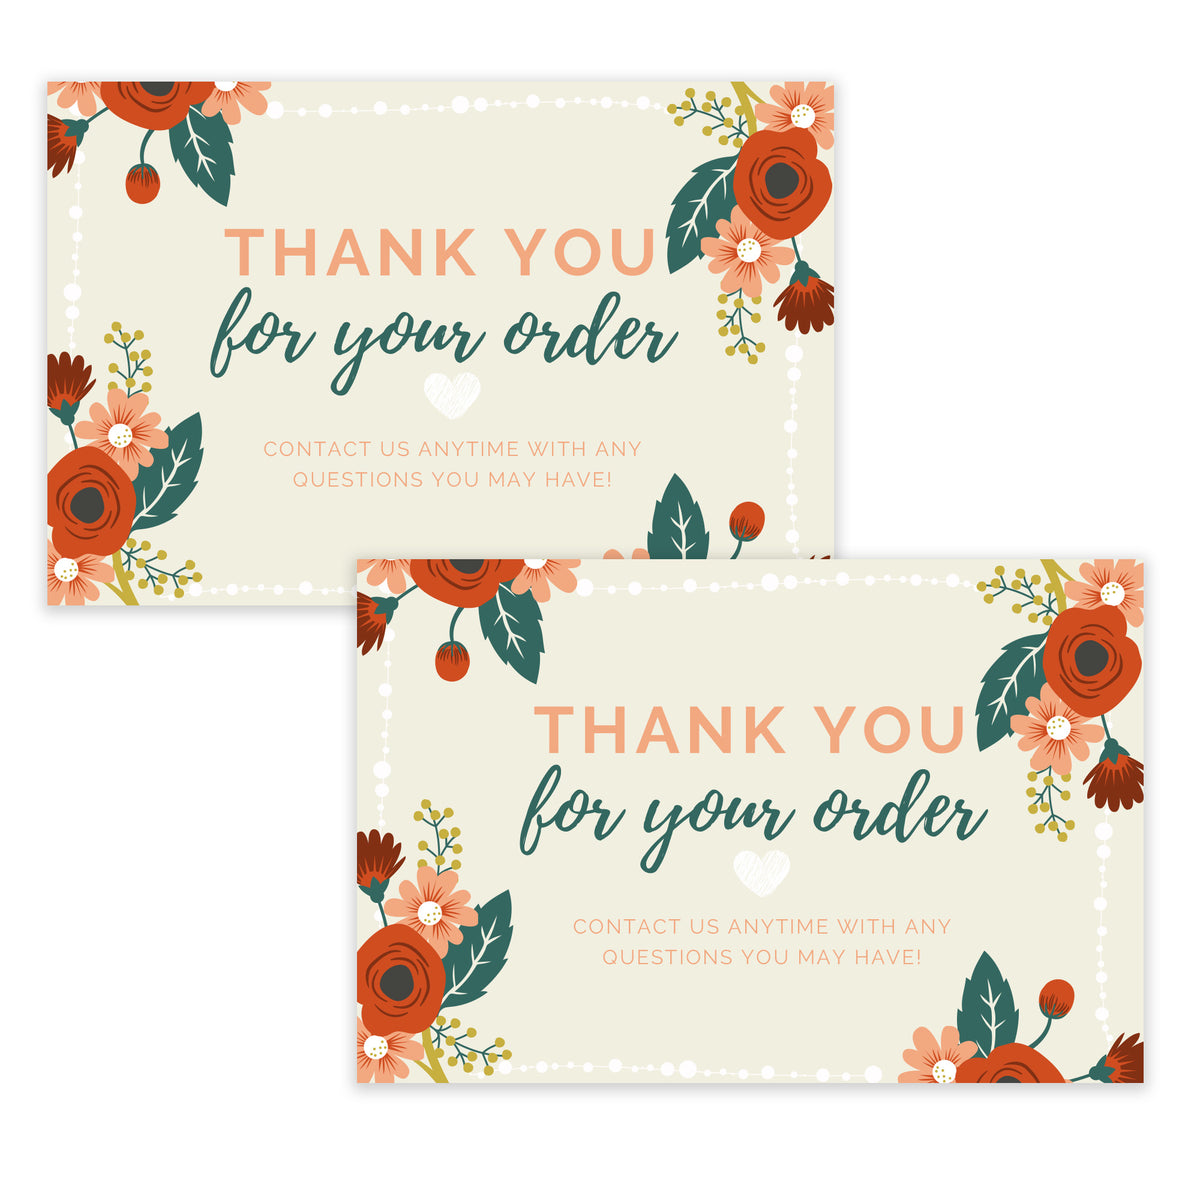 Pre-Printed Thank you Cards on 4x6 Discount Card Stock - 50 pack